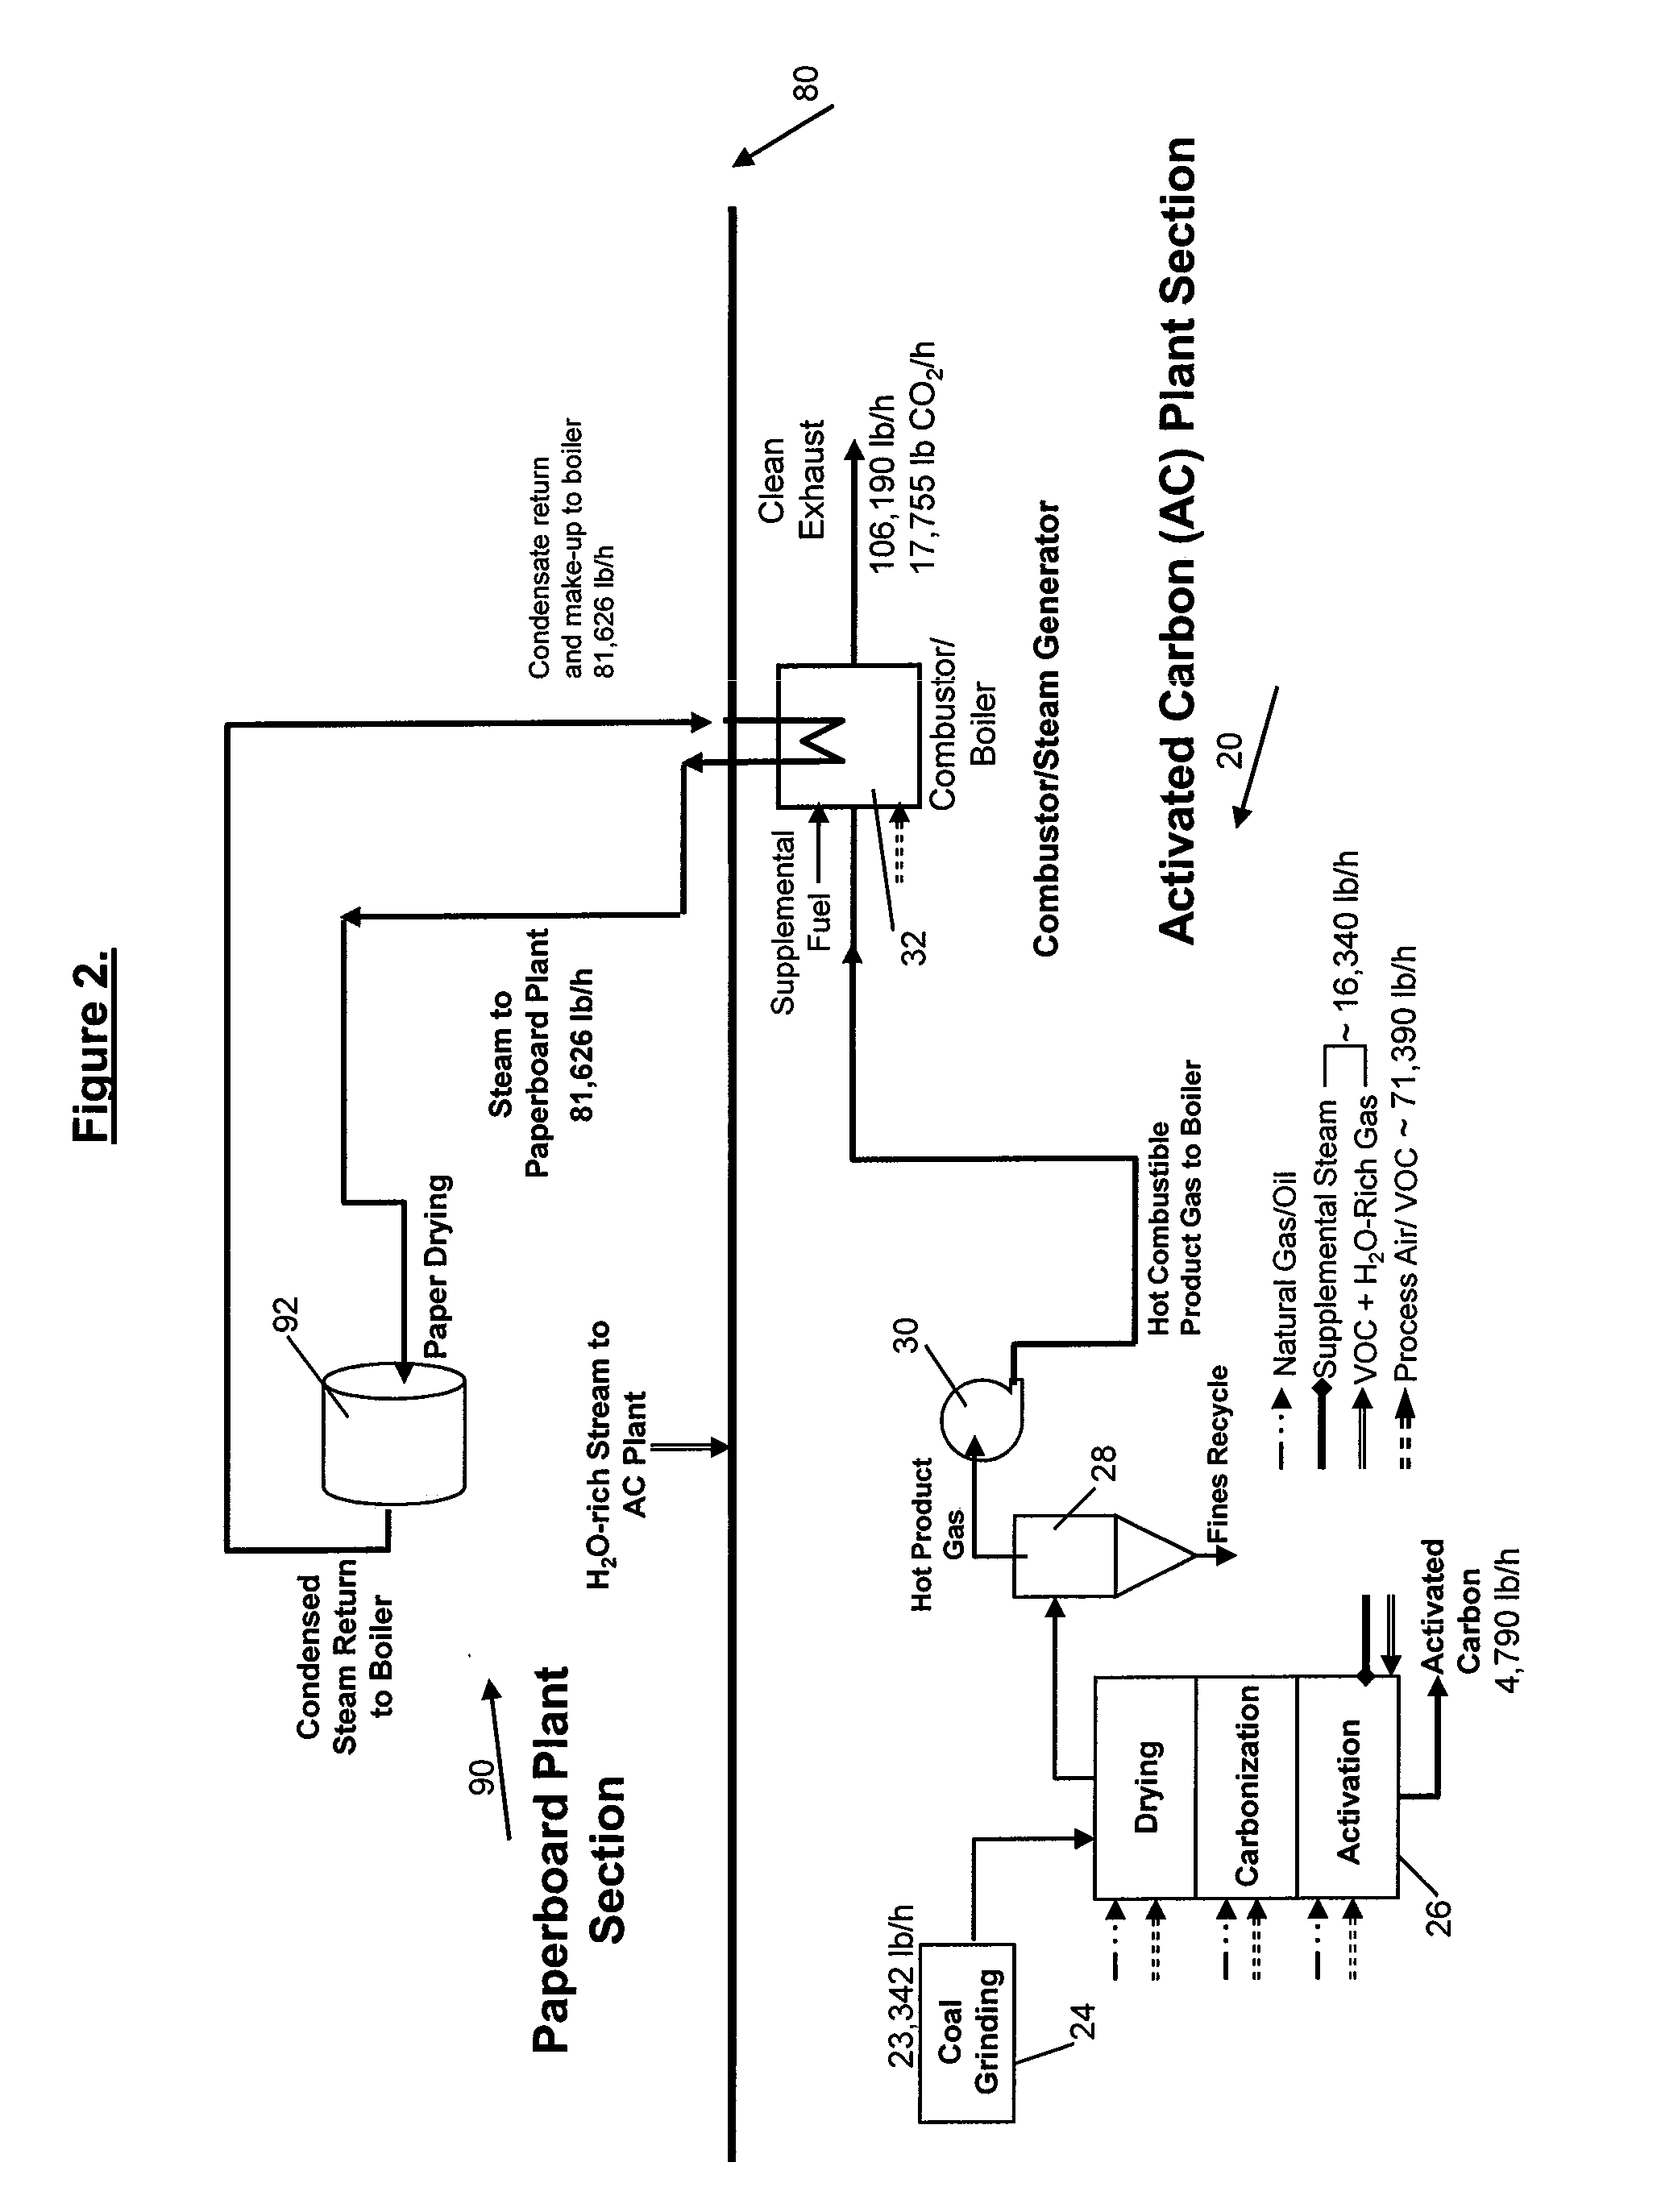 Method of Manufacturing Carbon-Rich Product and Co-Products